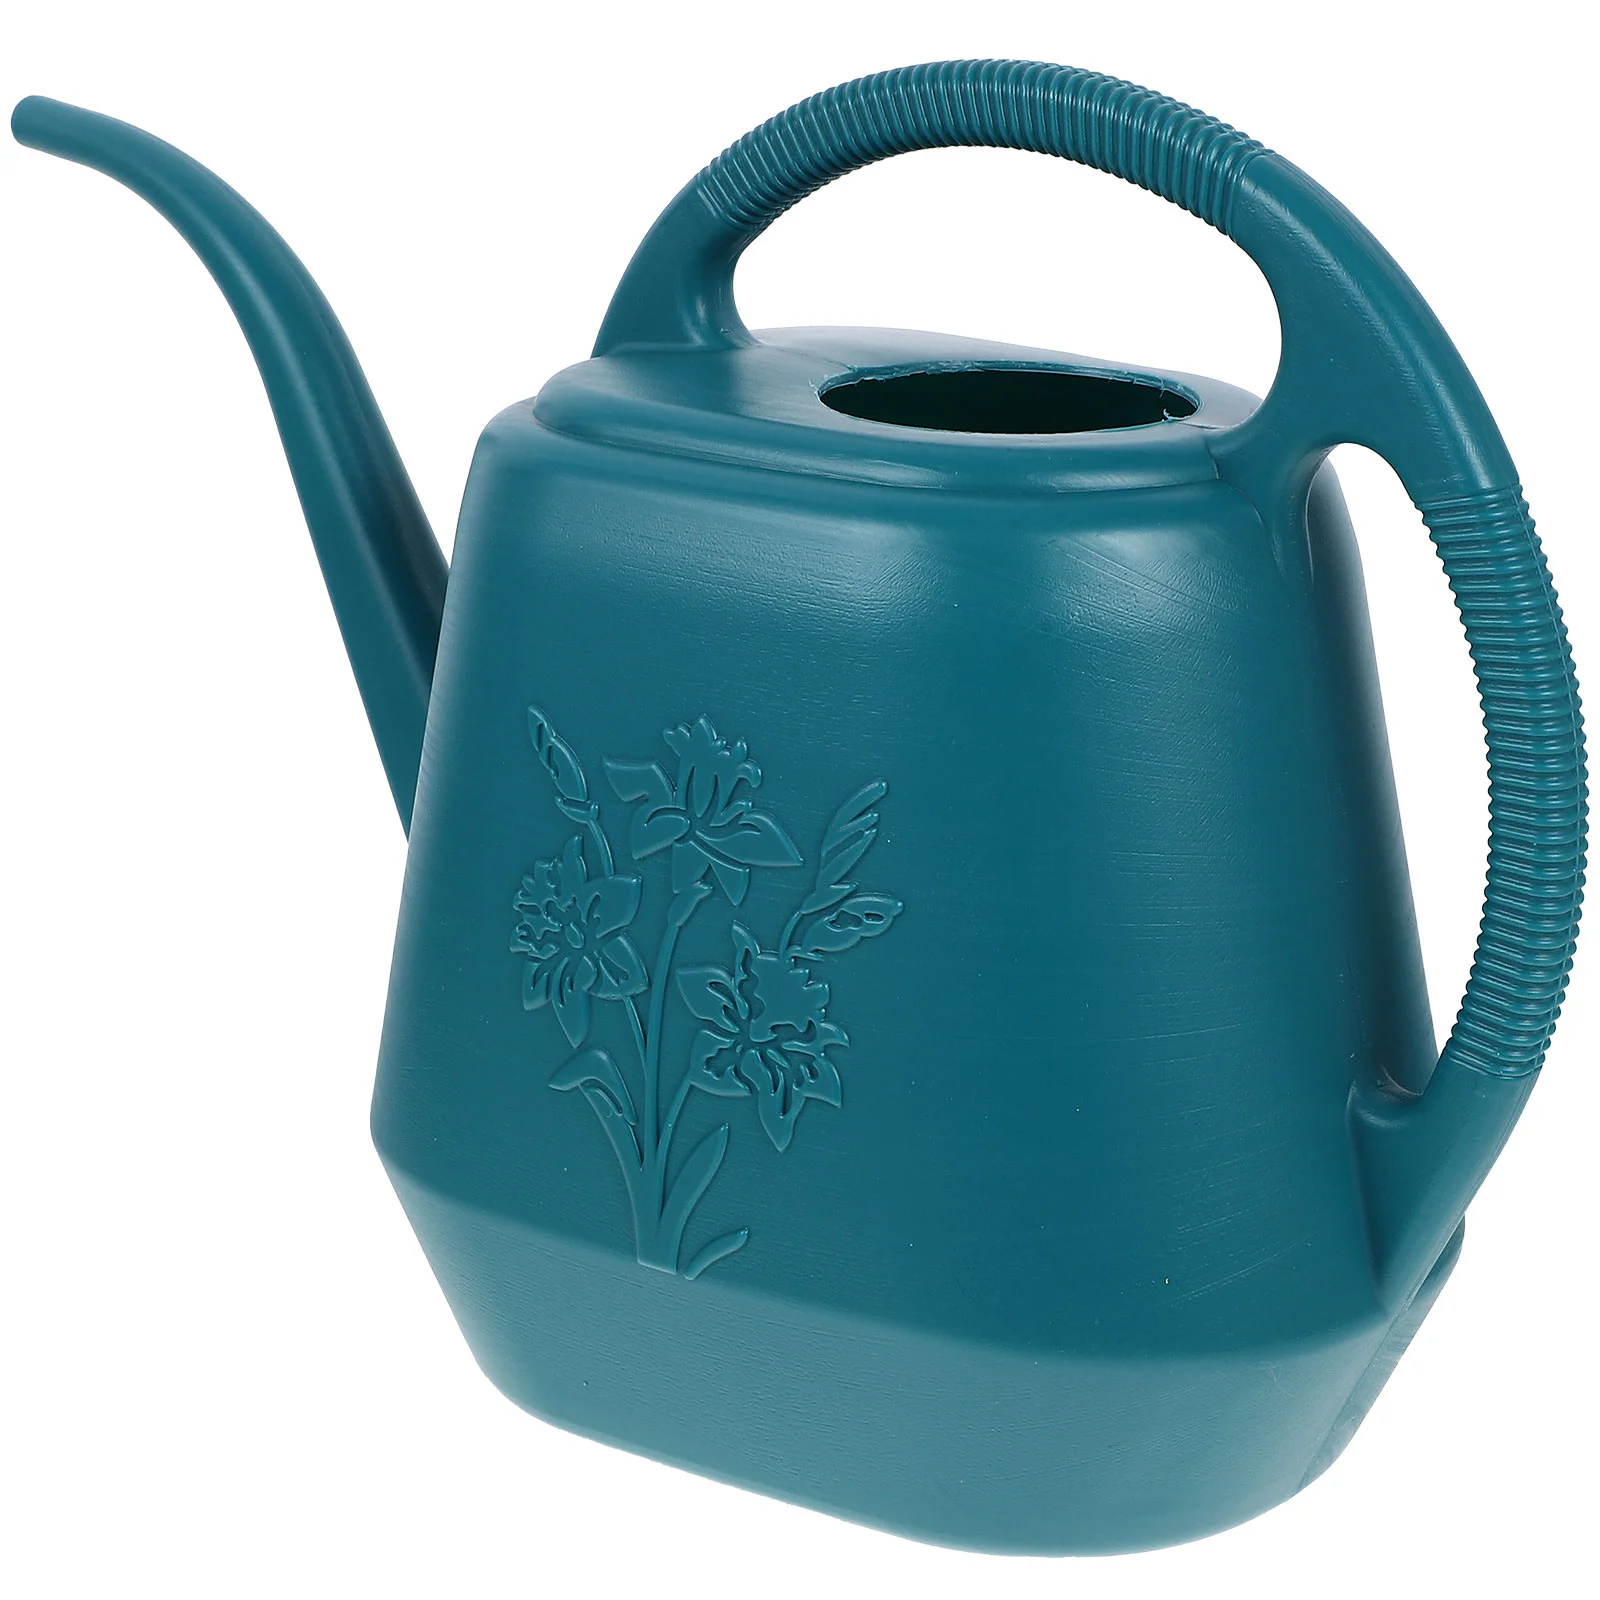 

Gardening Water Pot Home Watering Can Outdoor Flower Supply Long Spout Useful Flowers Kettle